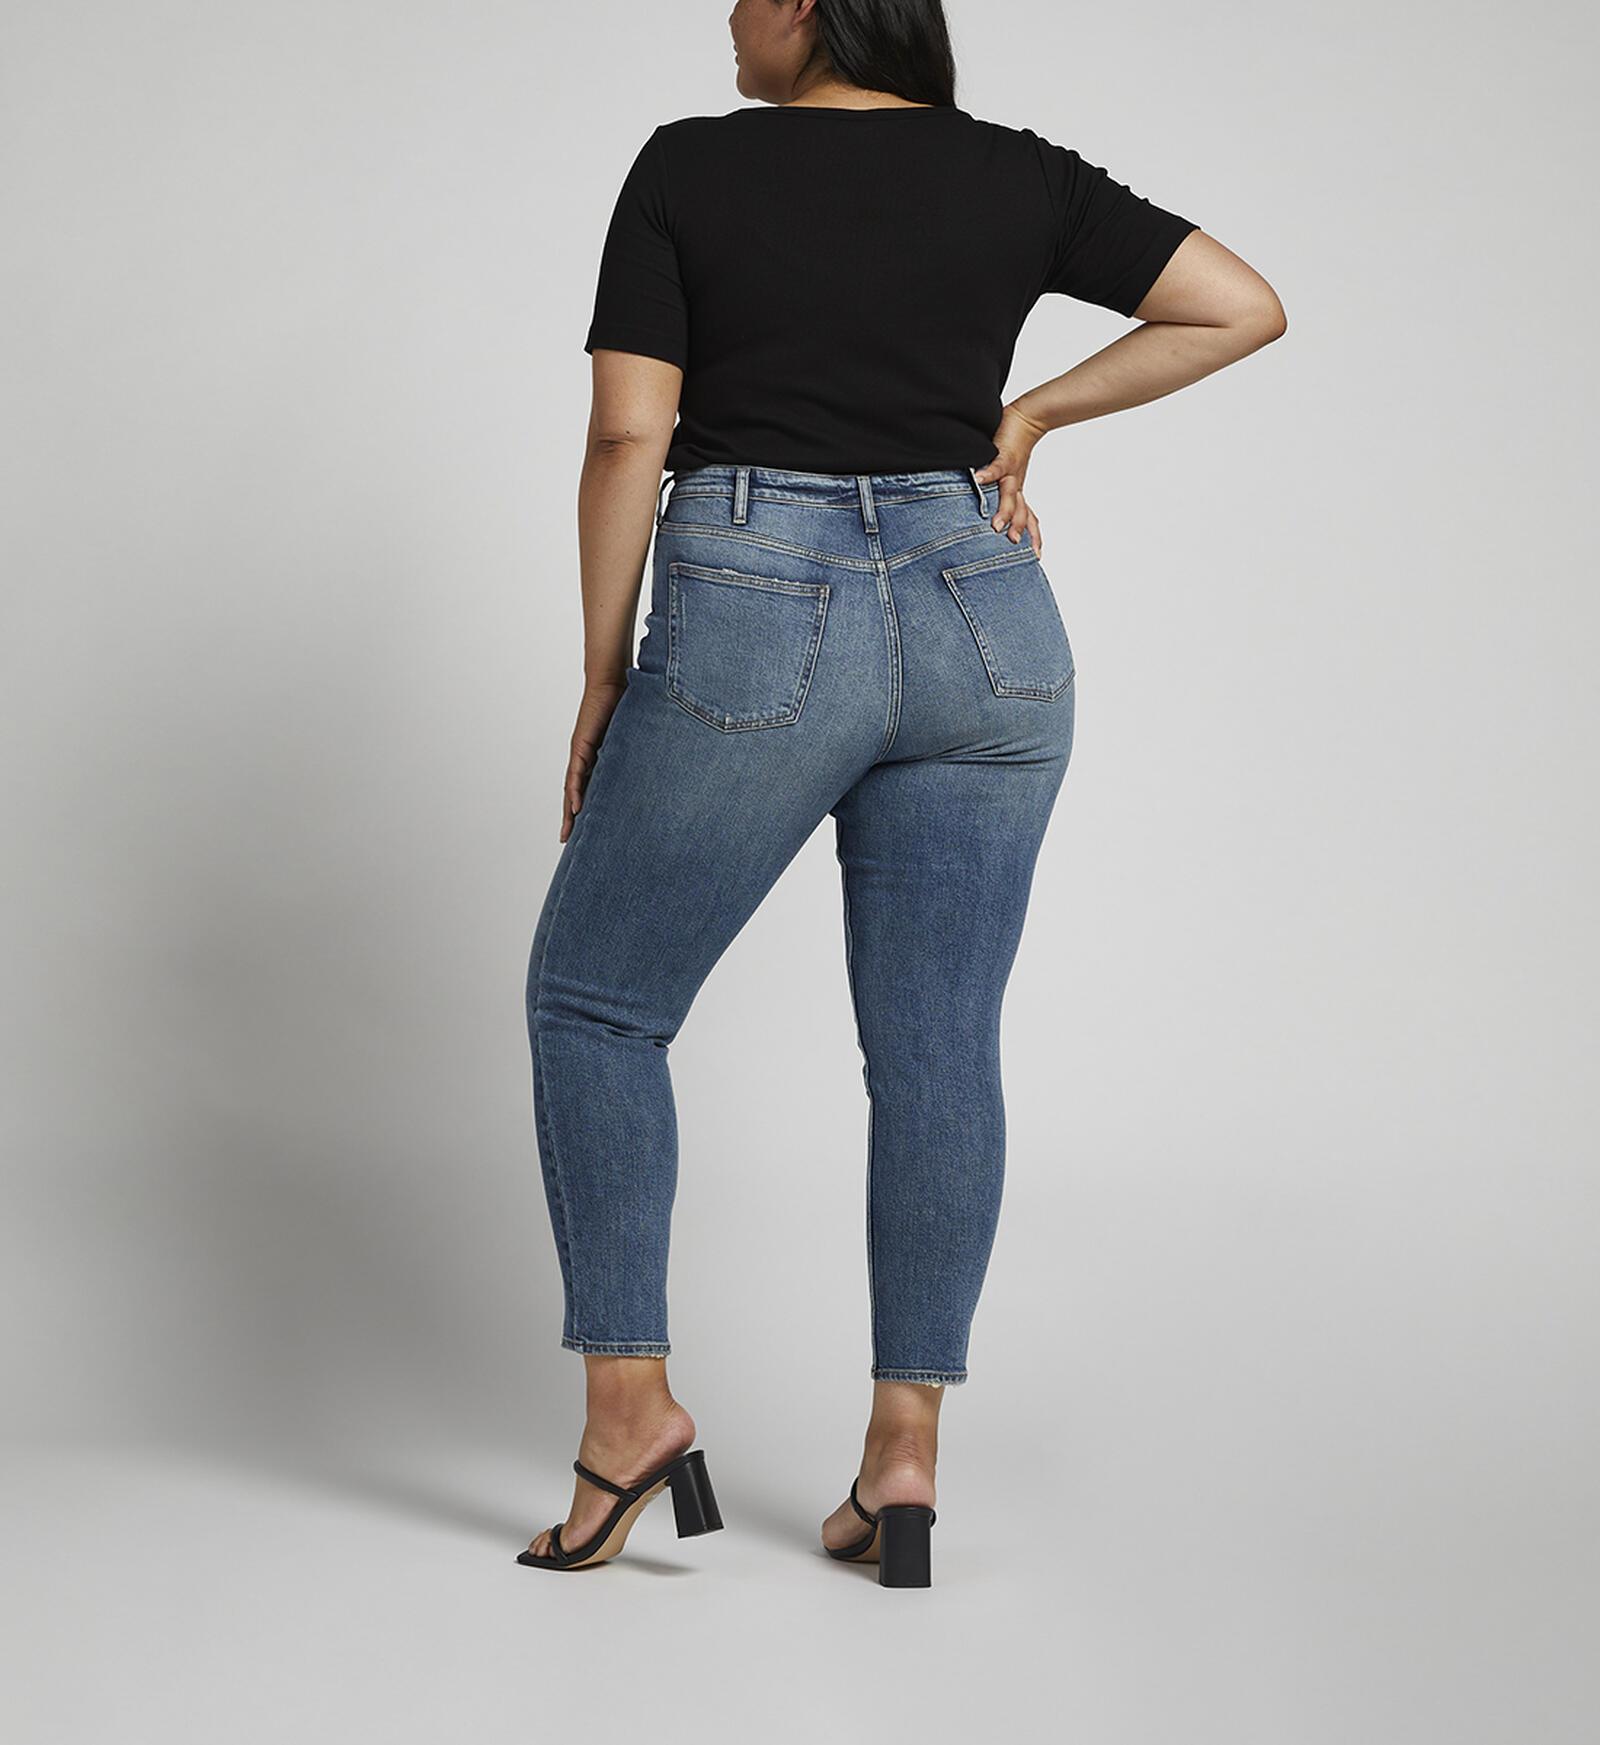 Buy High Rise Tapered Leg Mom Jean Plus Size for USD 84.00